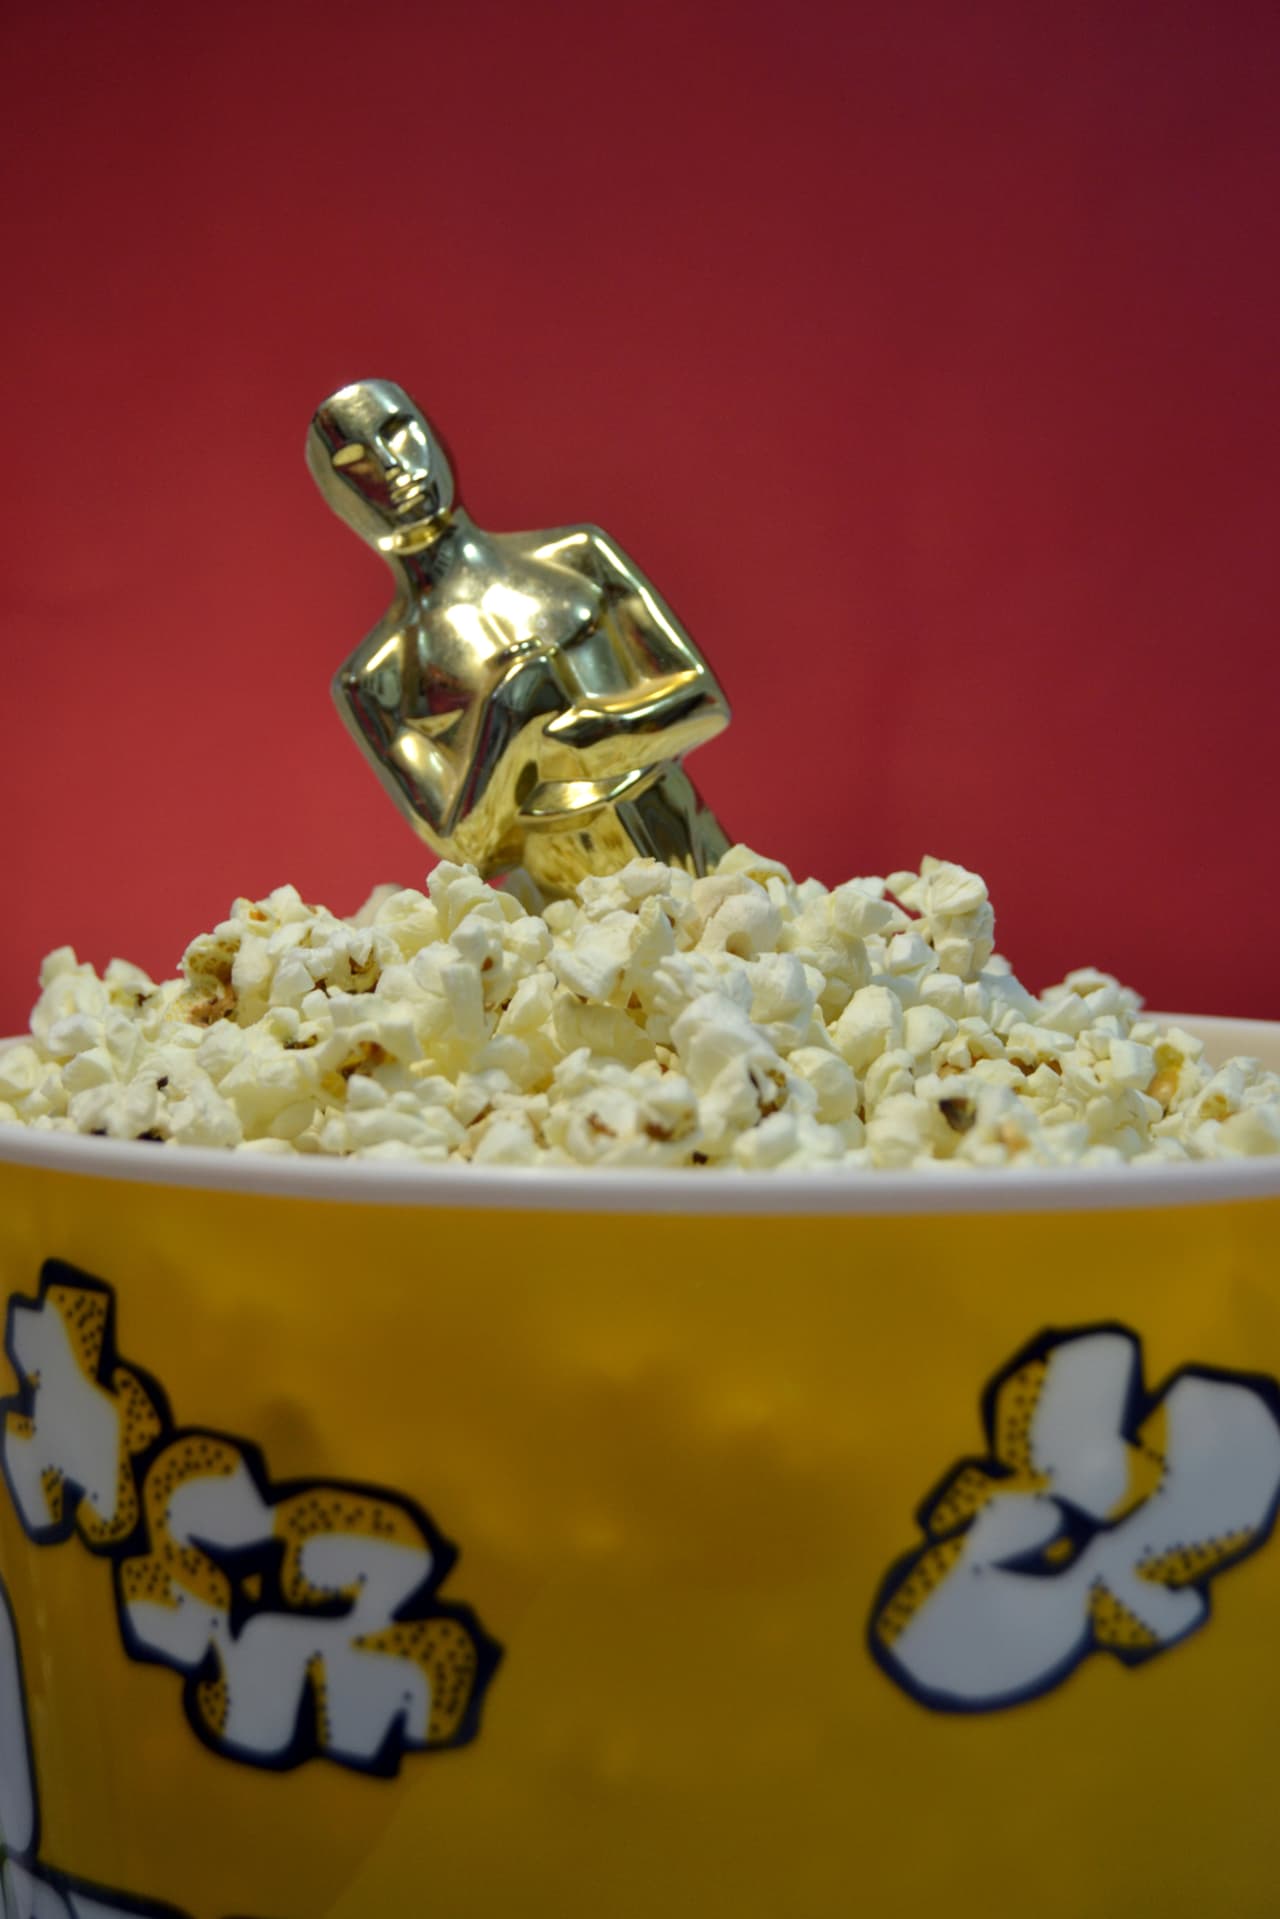 Popcorn and the movies go hand in hand.